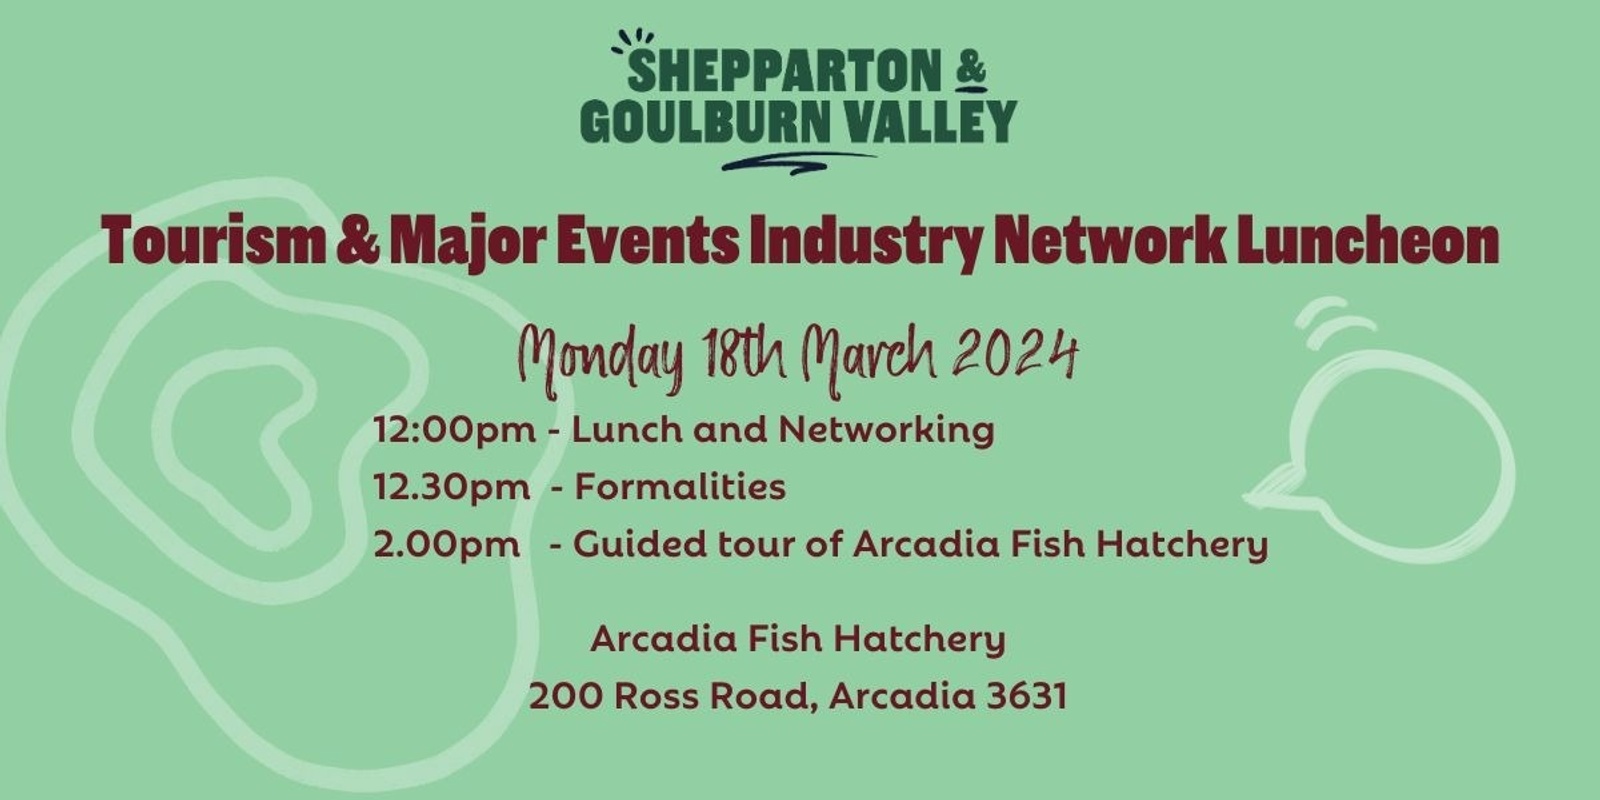 Banner image for Shepparton & Goulburn Valley Tourism & Major Events Industry Network Luncheon